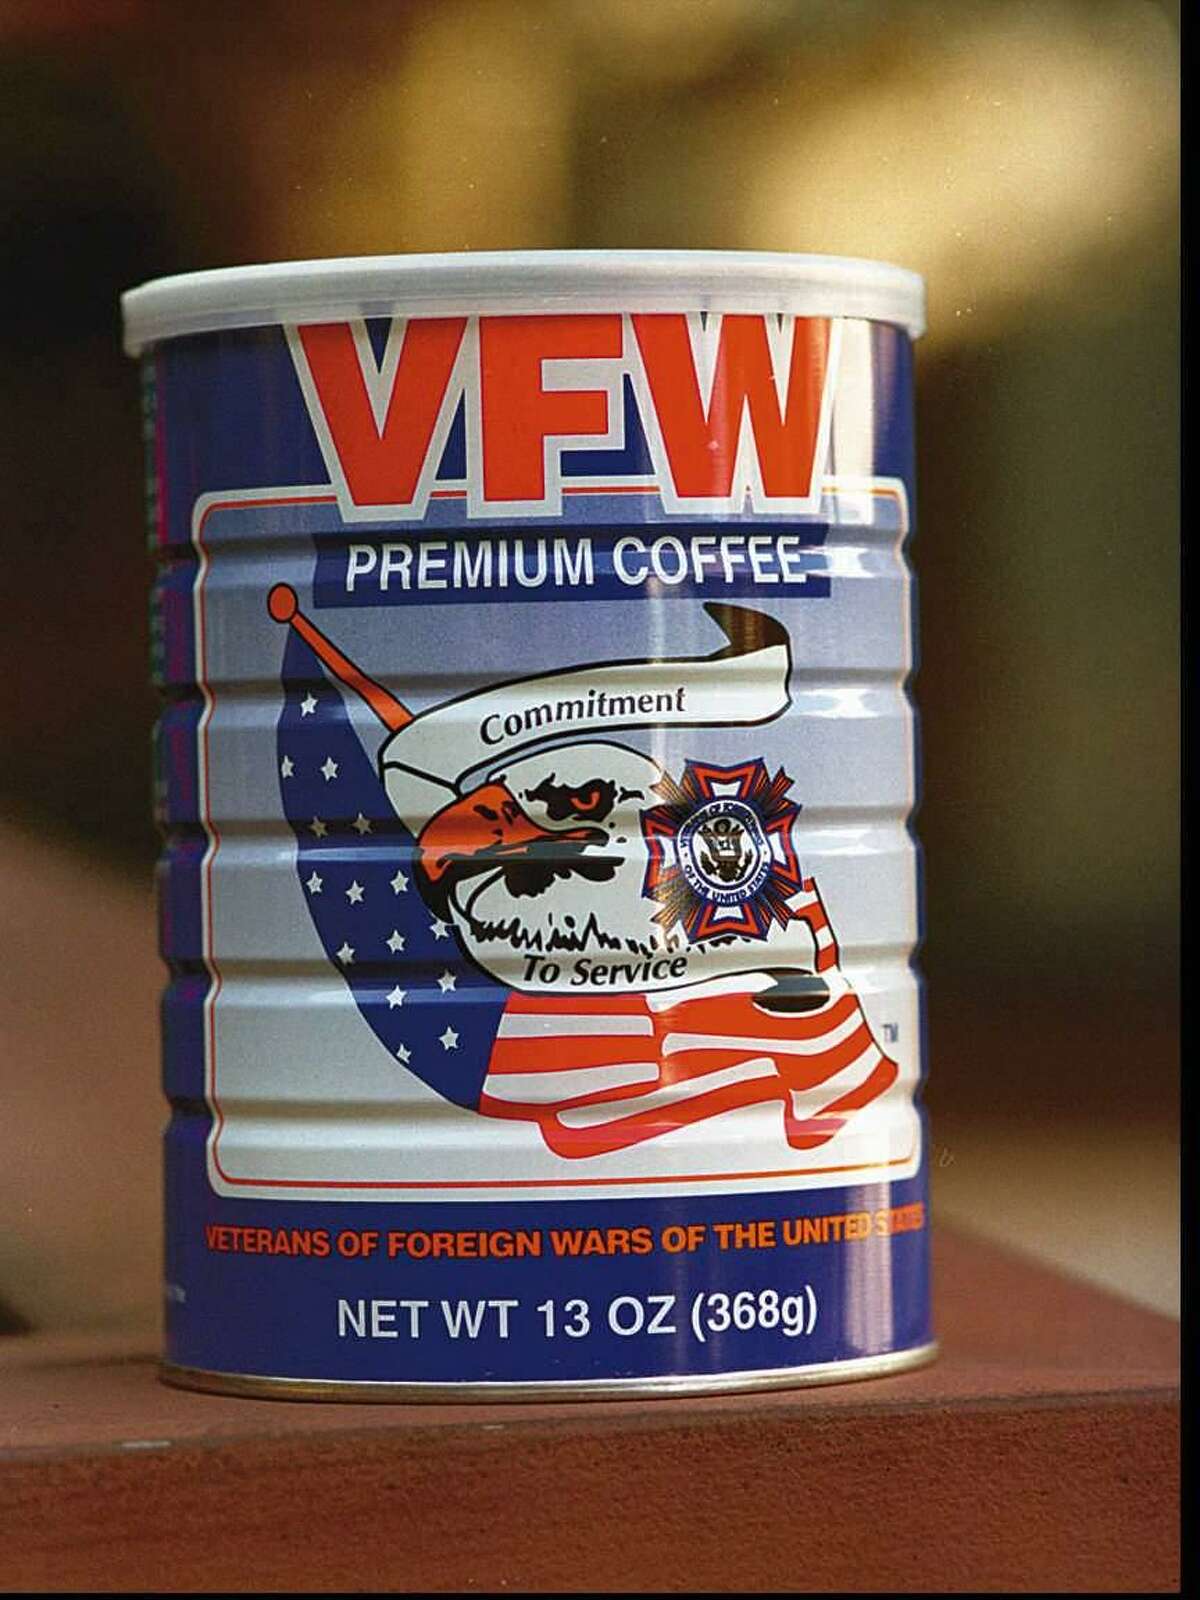 VFW coffee will be sold at the upcoming Veterans Day parade Sunday in Stamford. Nov 10, 94 Tom Ryan/Staff Photo